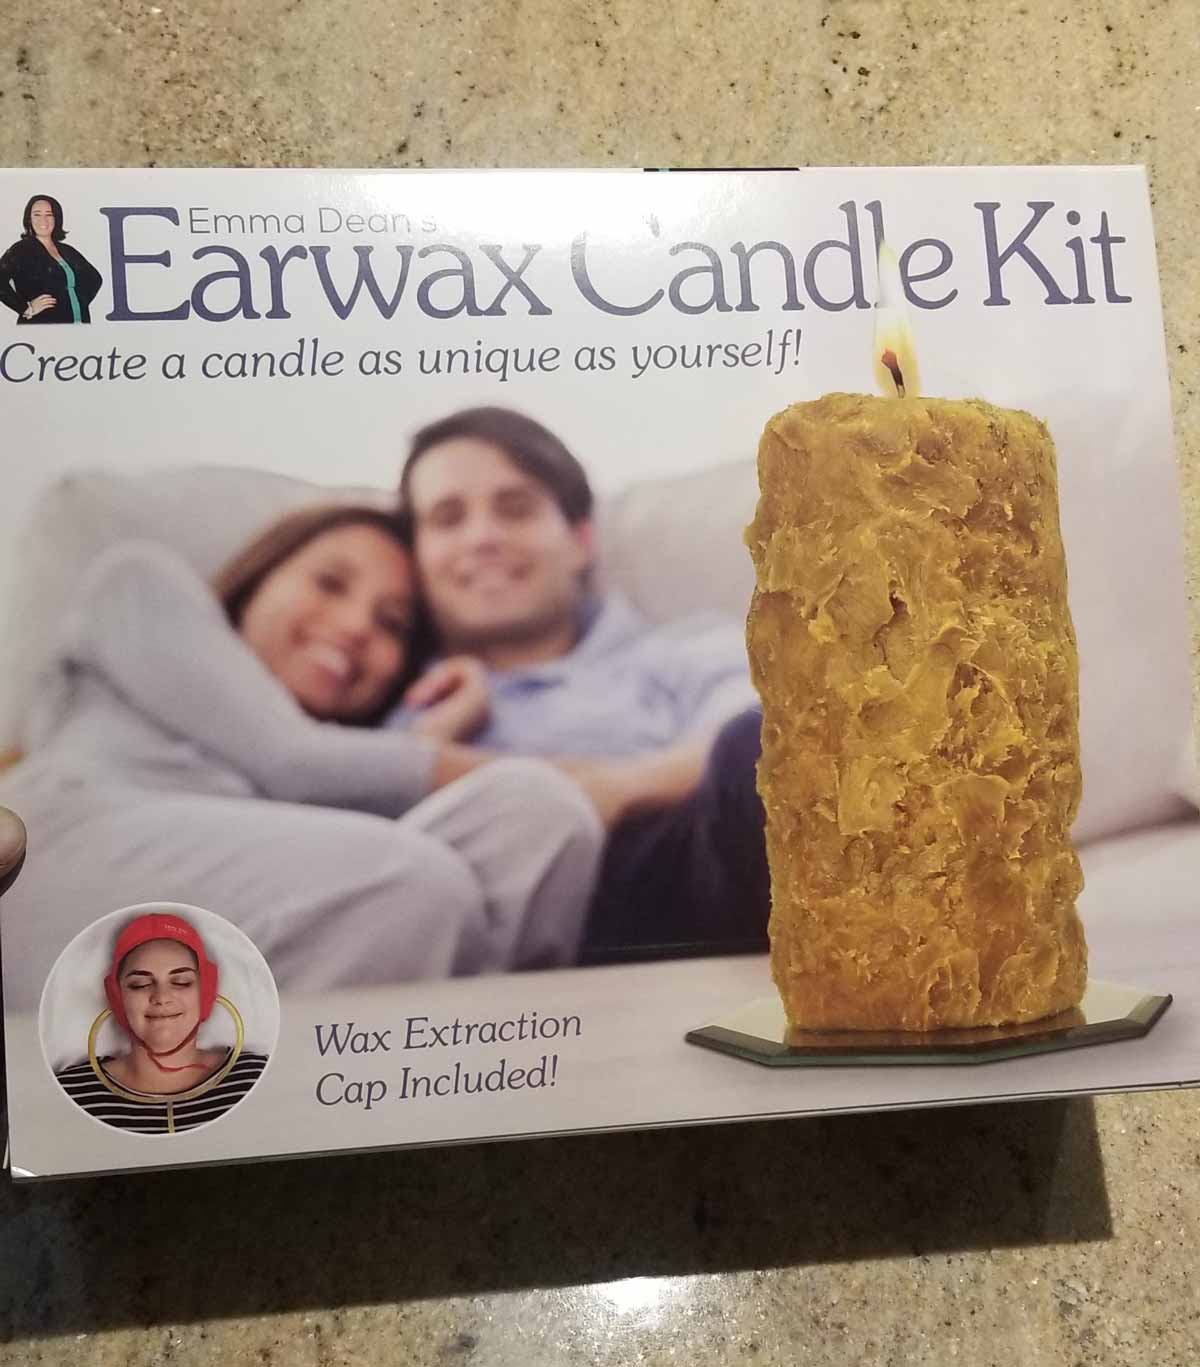 Wife told me to pick up a unique present for her boss..